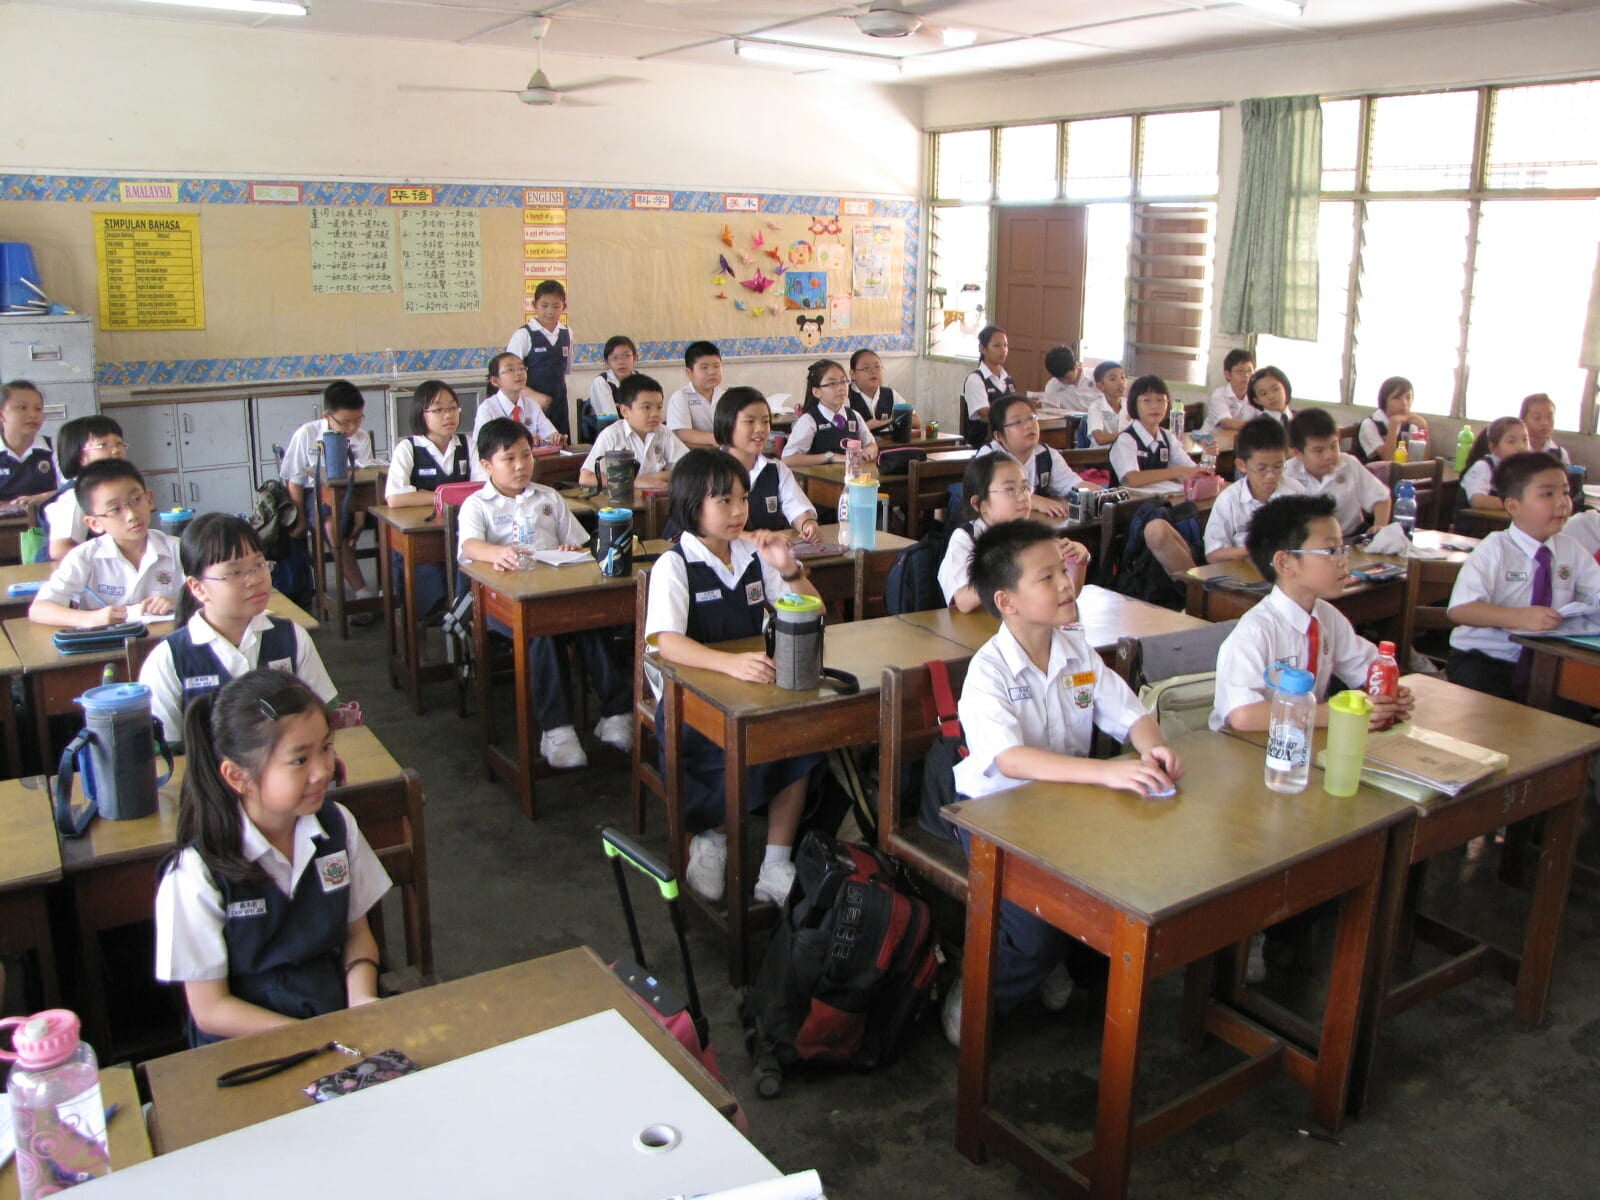 classroom full of attentive students in malaysia